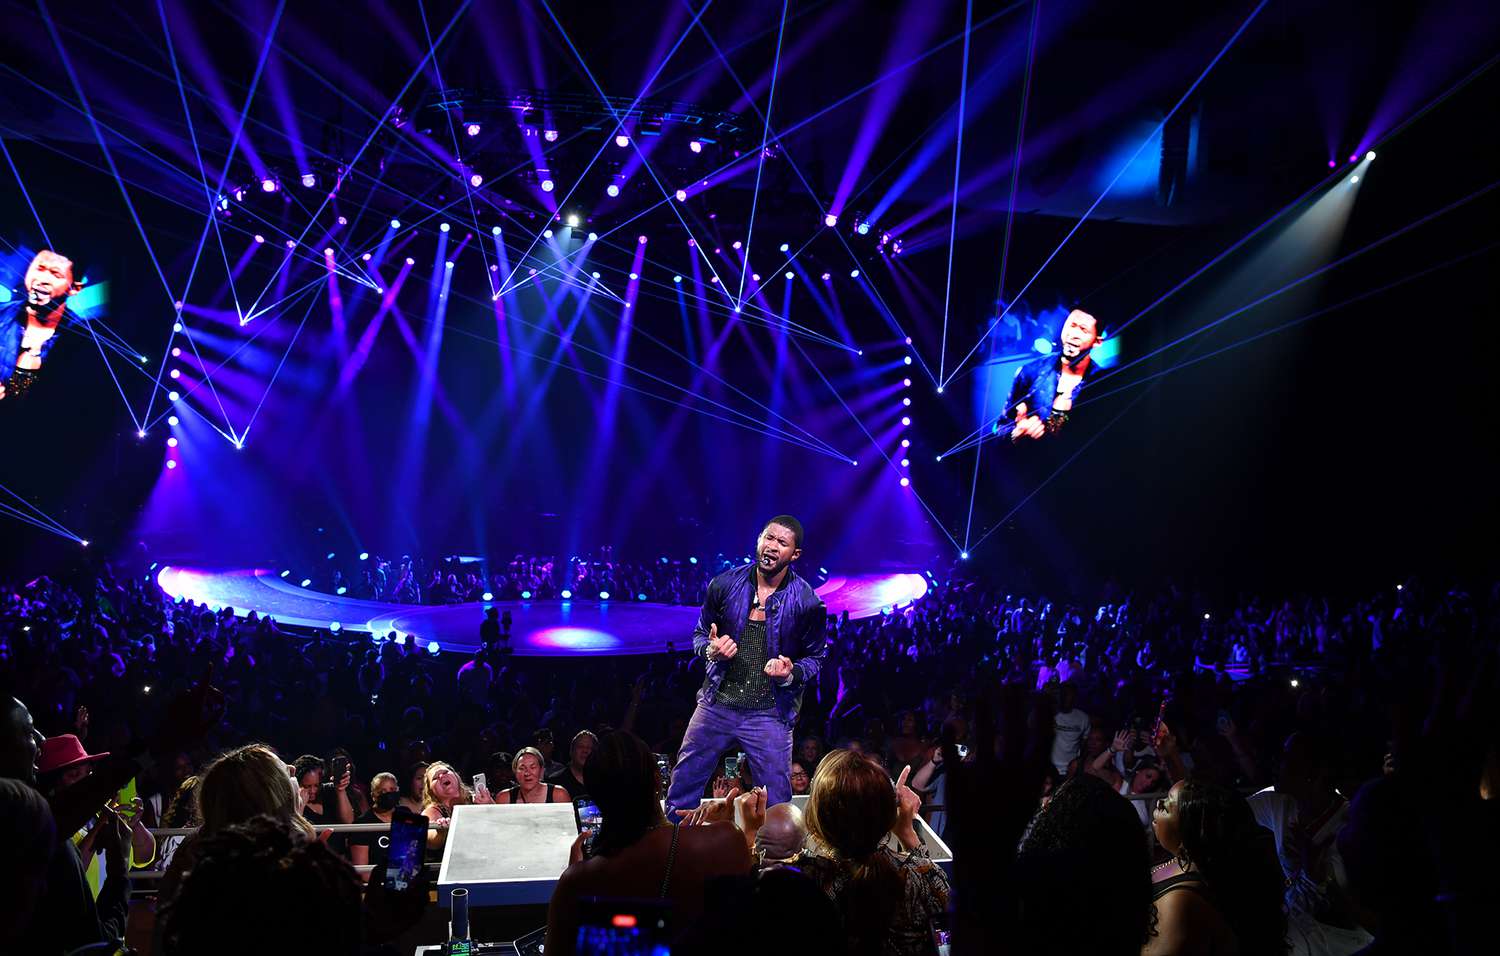 A photo of Usher performing at the Super Bowl LVIII halftime show, surrounded by a crowd of energetic dancers and illuminated by colorful stage lights.